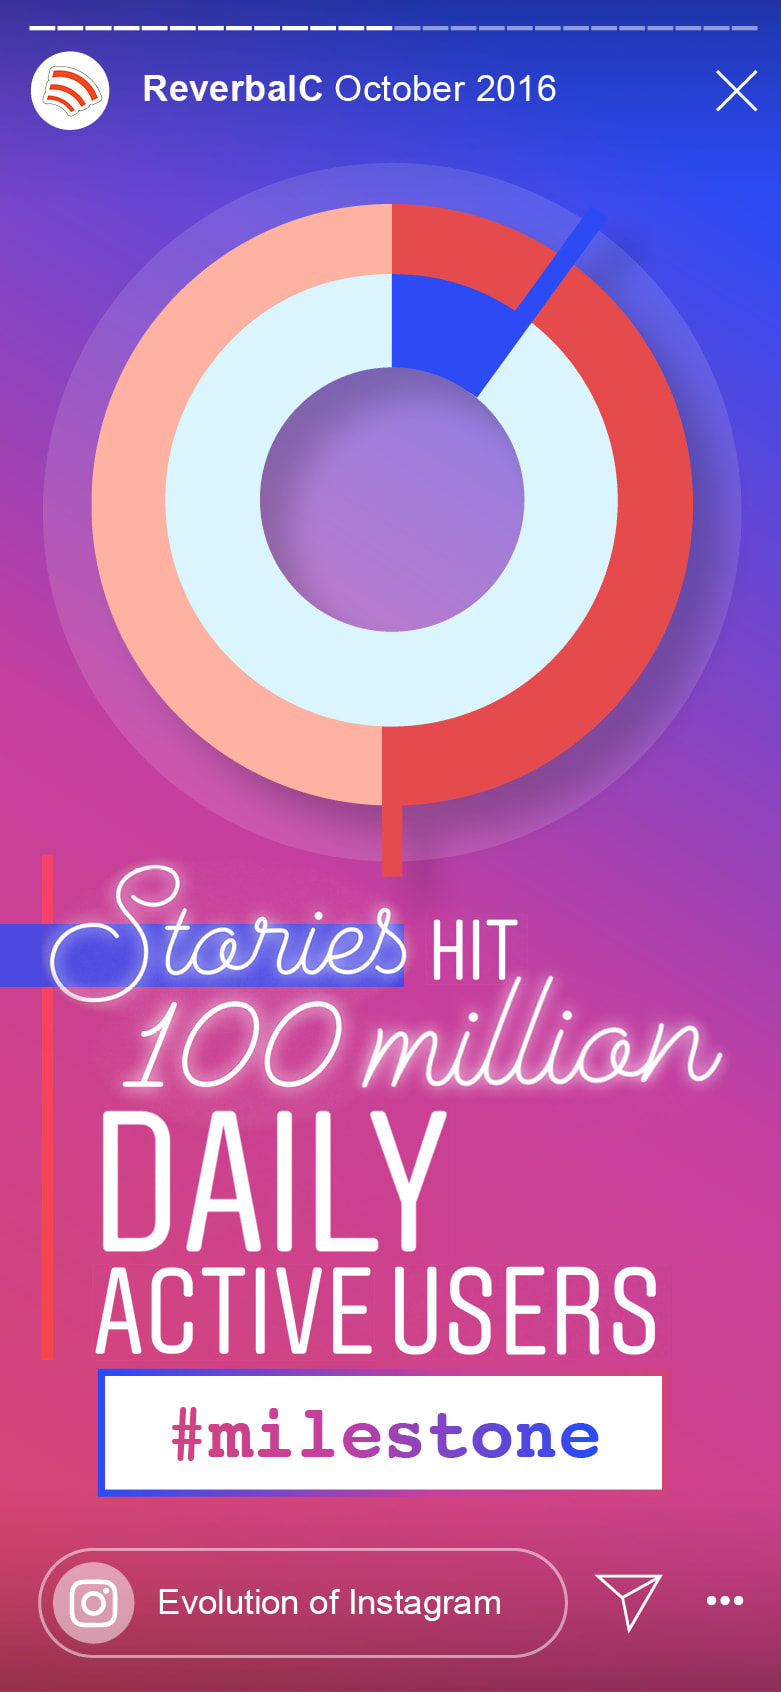 When did Instagram Stories hit 100 million daily active users?